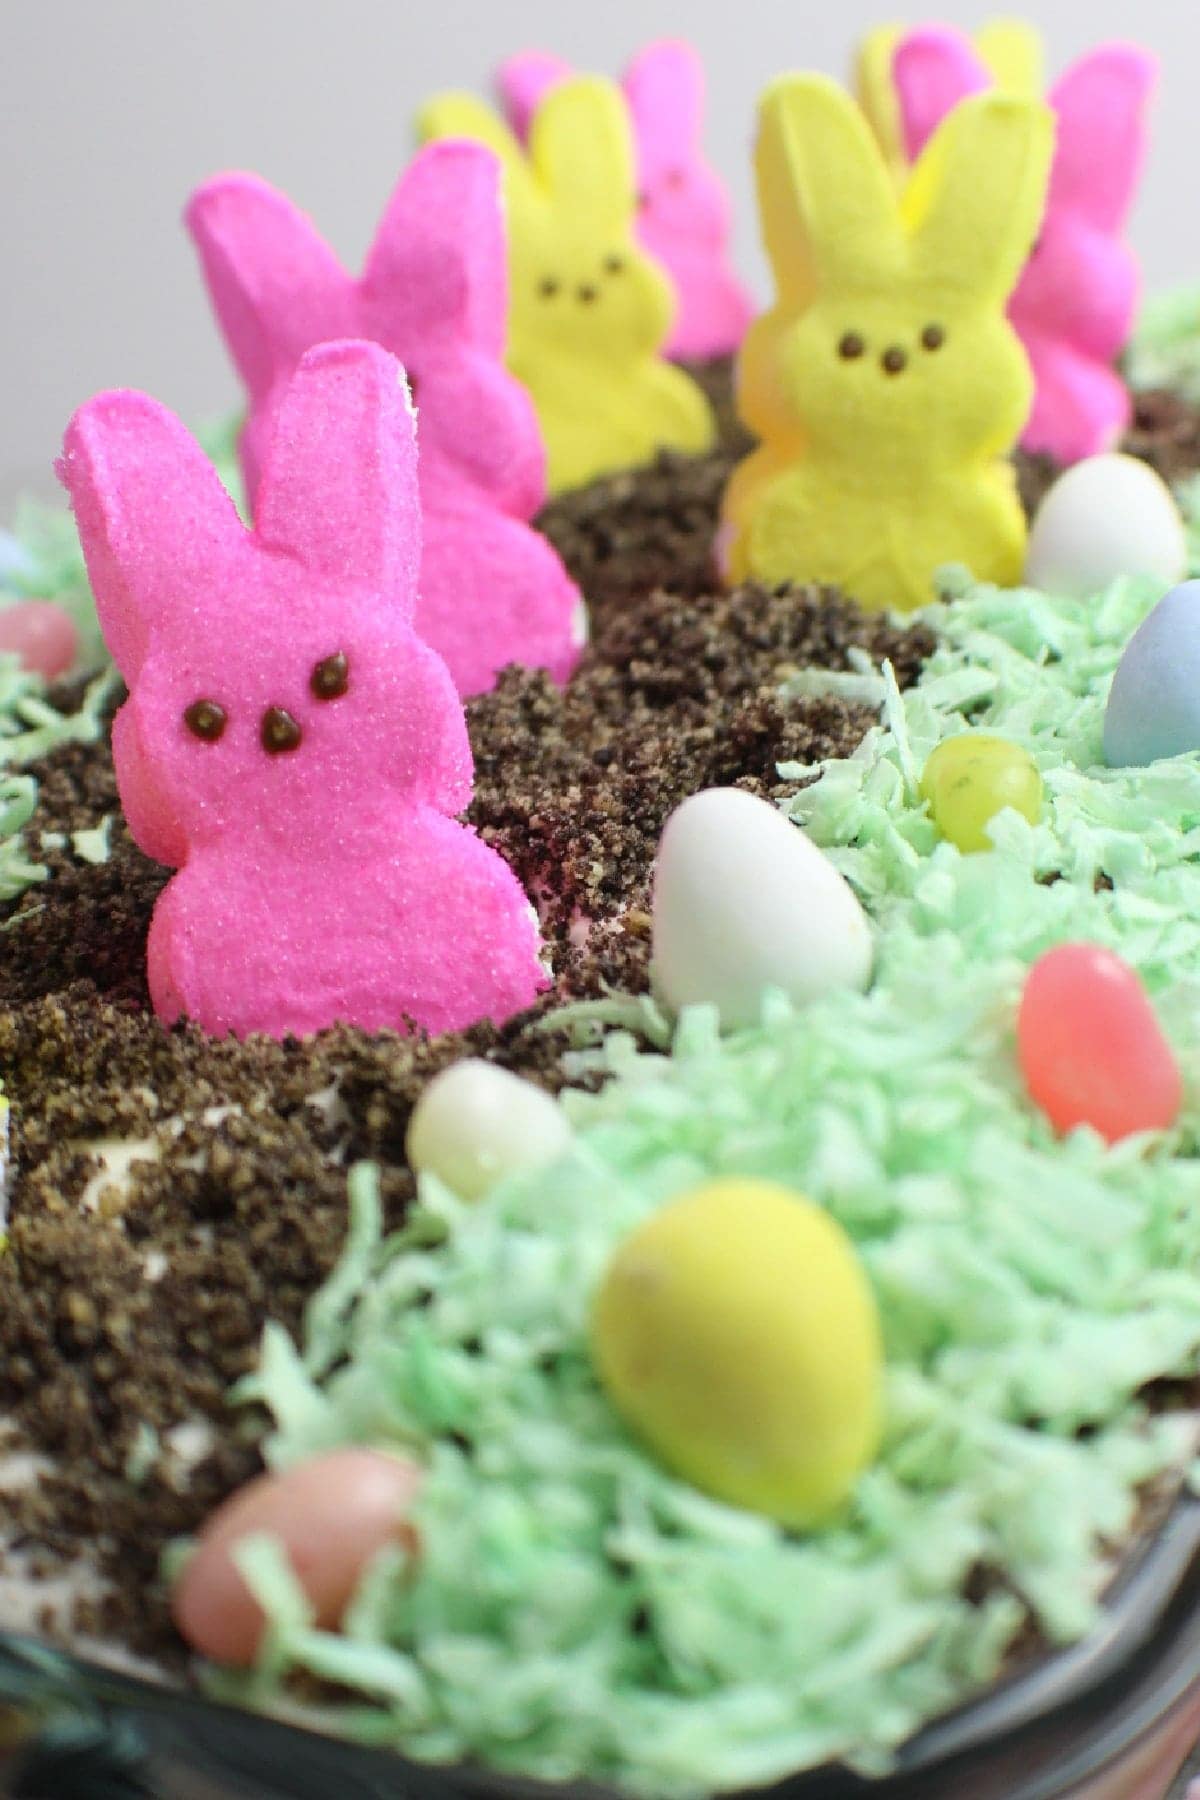 An easter-themed dessert decorated with pink and yellow bunny marshmallows, candy eggs, and green coconut shavings on a bed of crushed chocolate cookie crumbs.